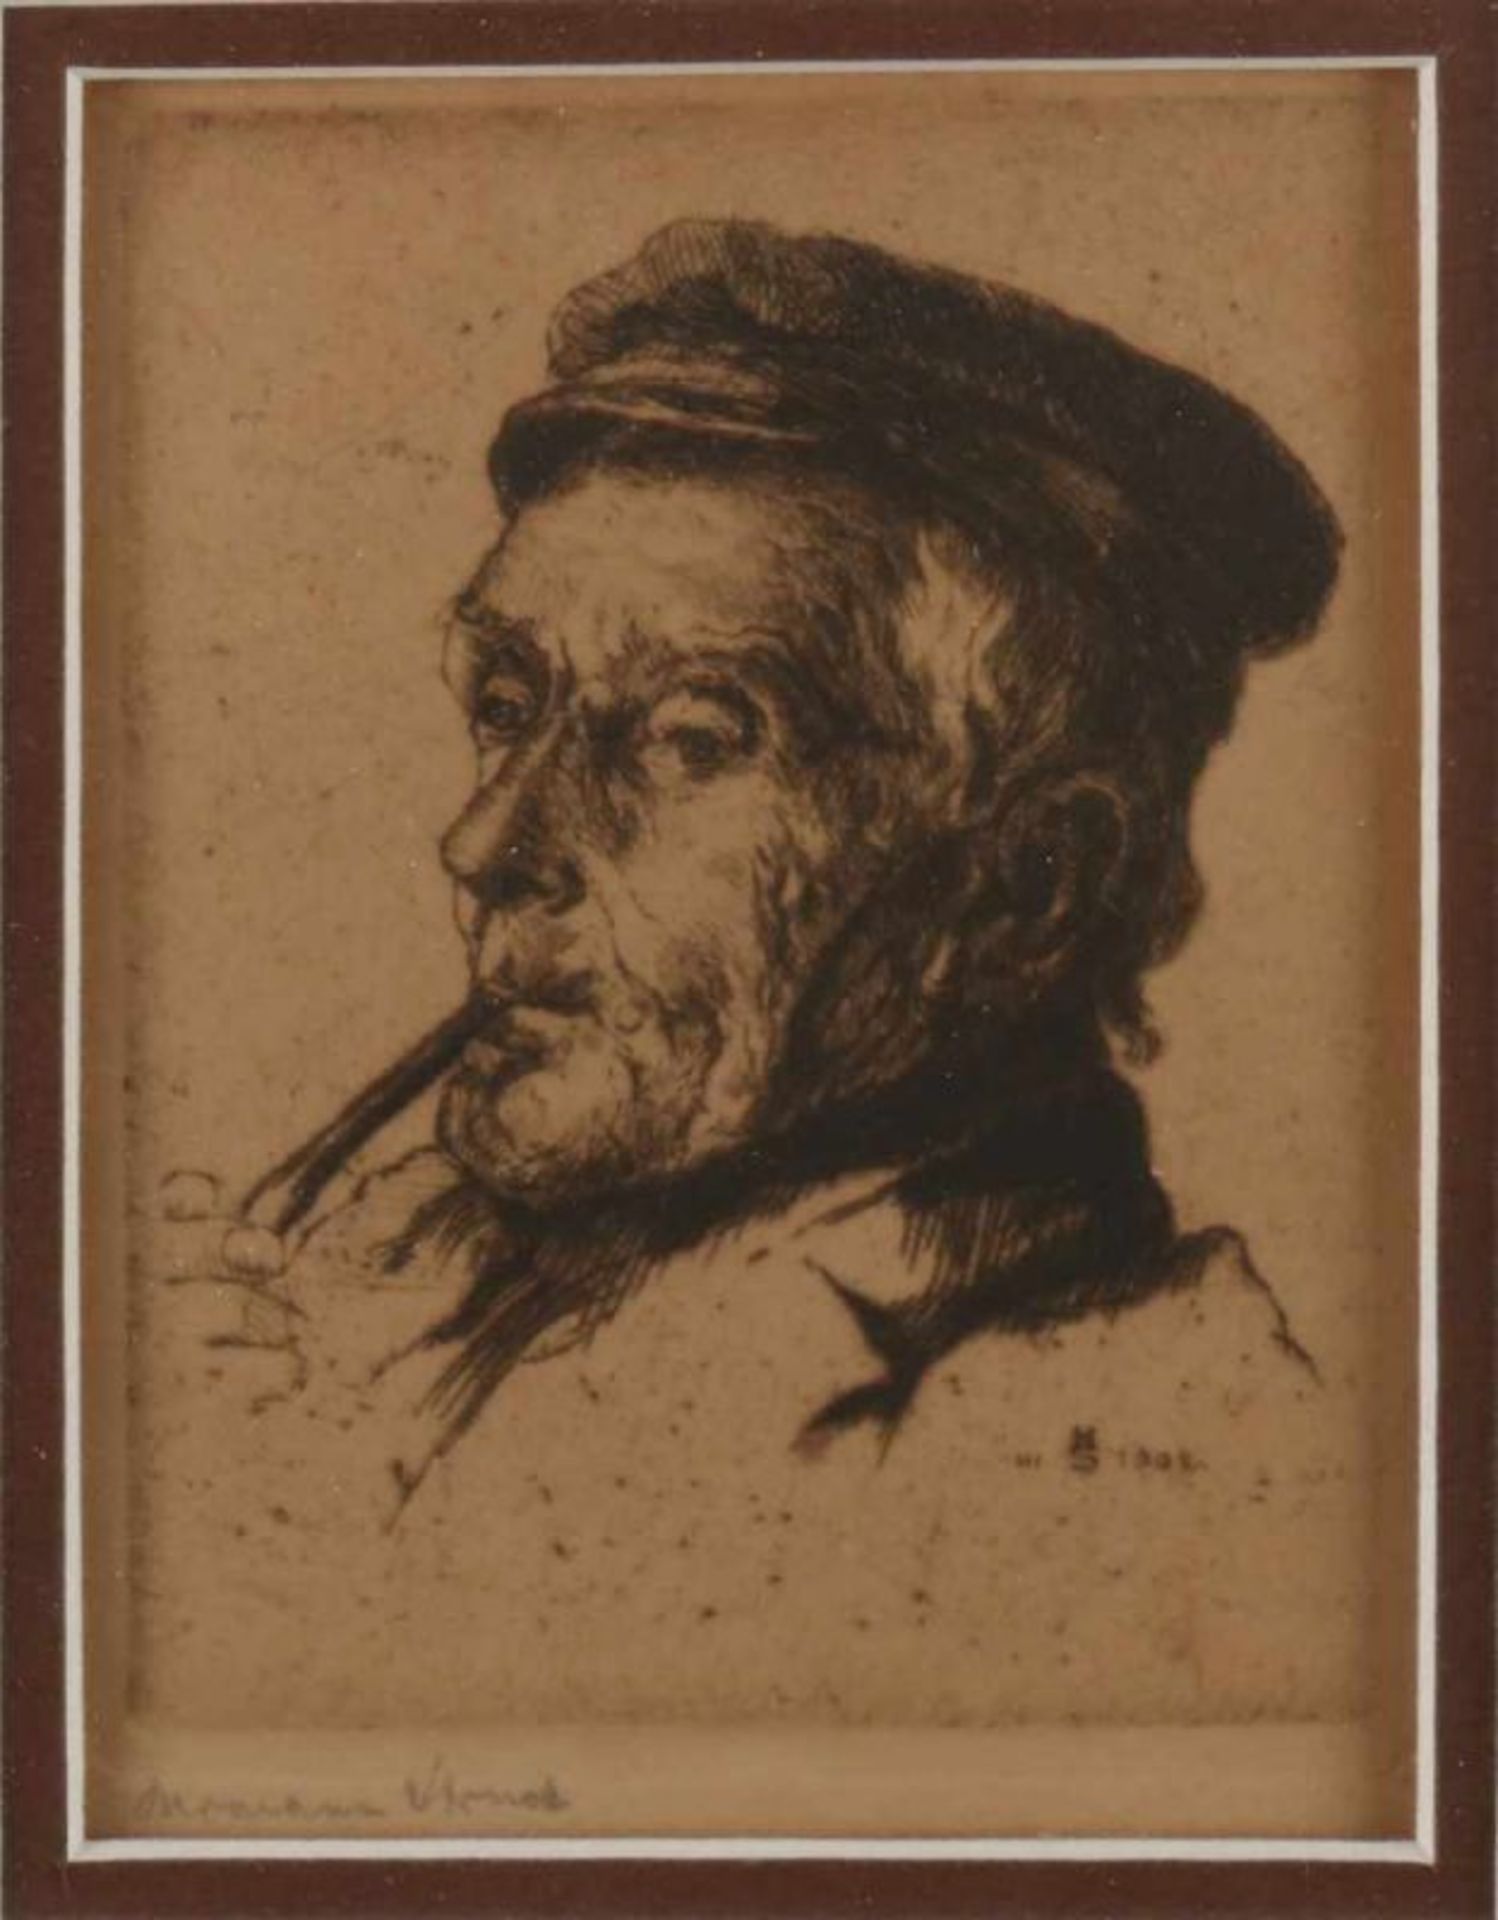 Monogram H.S. 1892. Boer smoke pipe. Etching on paper. Size: 13 x B H 9 cm. In good condition.